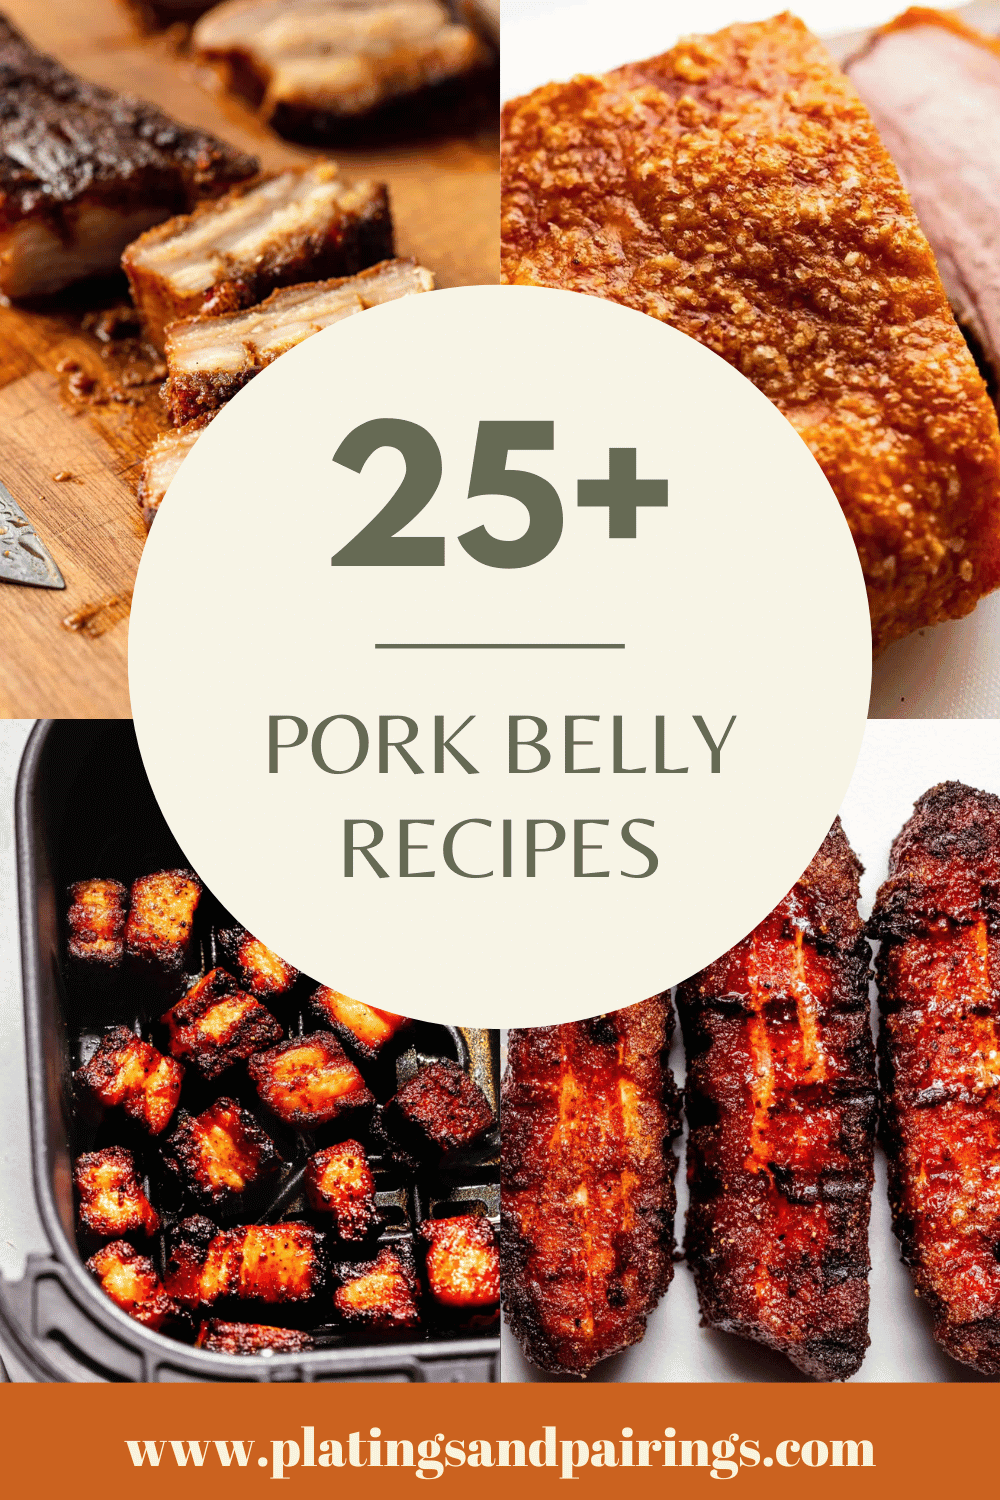 Collage of pork belly recipes with text overlay.